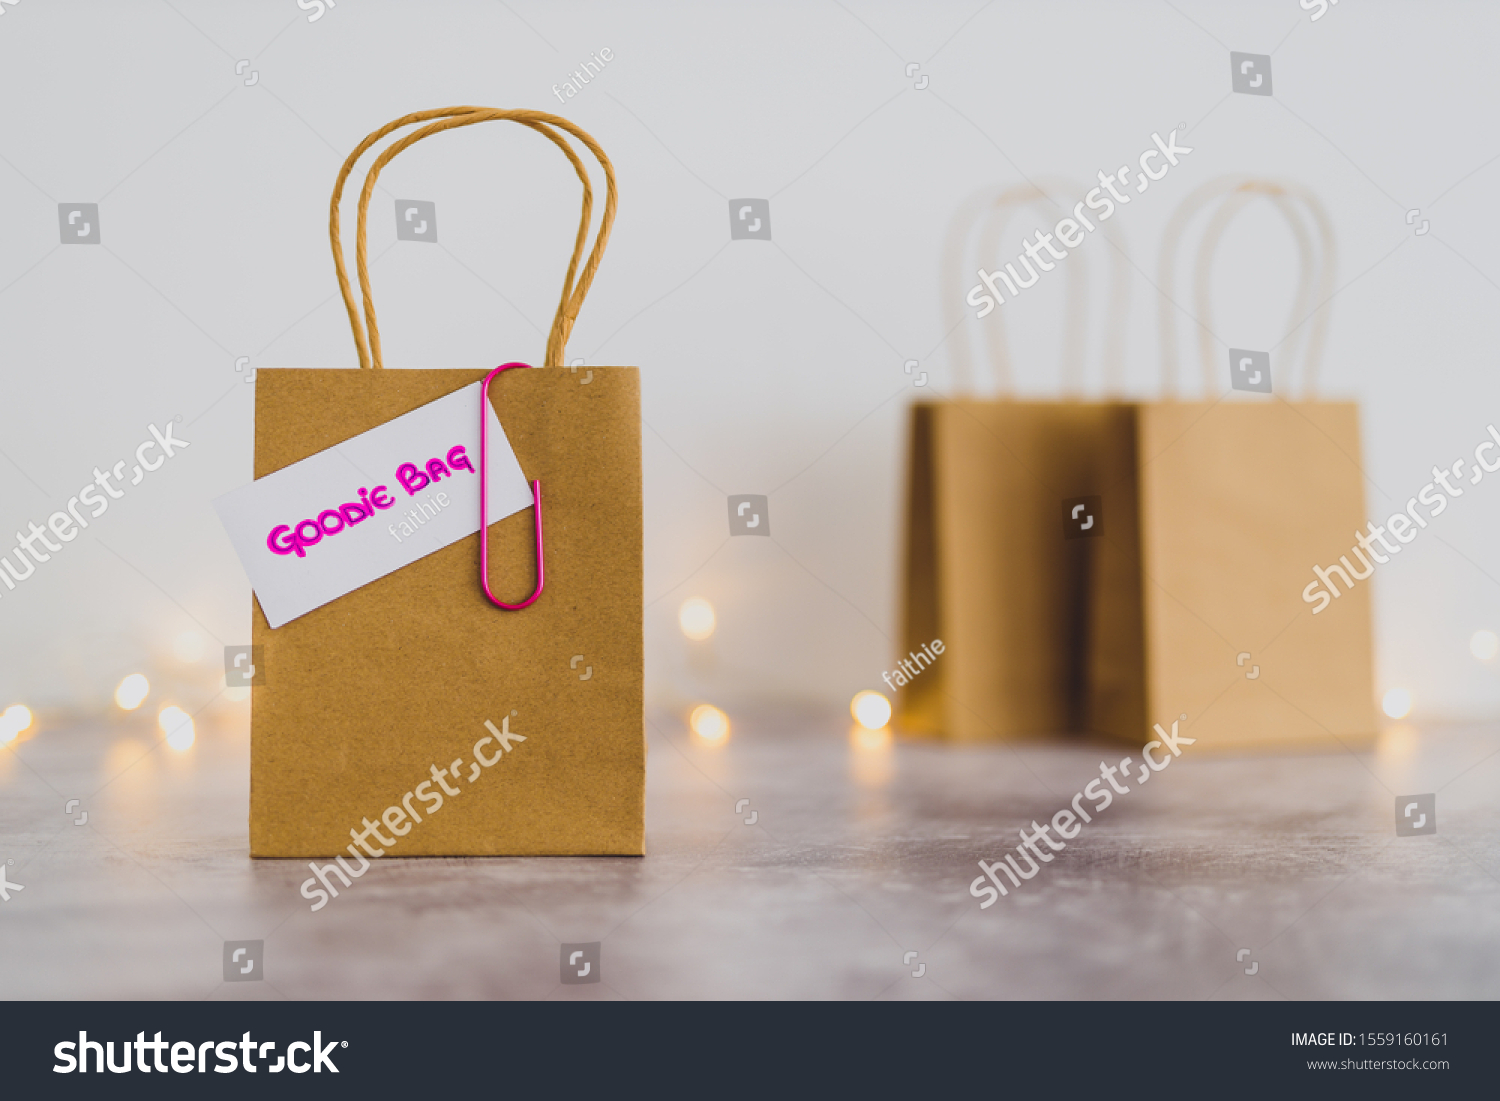 free samples and gifting conceptual still-life, shopping bag with price tag with Goodie Bag text on it and other bags in the background shot at shallow depth of field with bokeh and fairy lights #1559160161